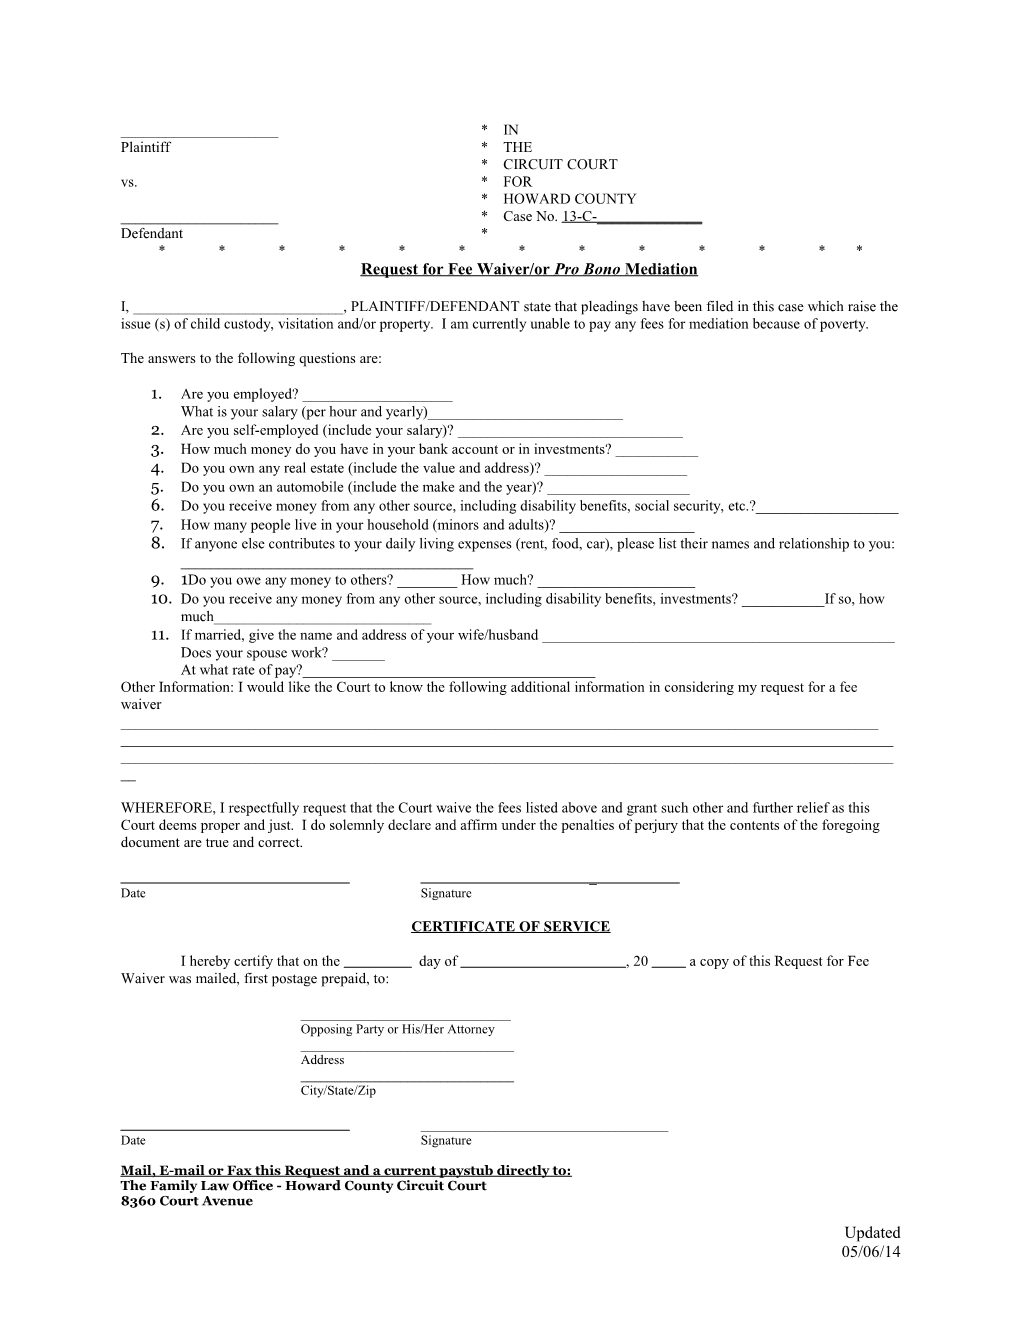 Request for Fee Waiver/Or Pro Bono Mediation